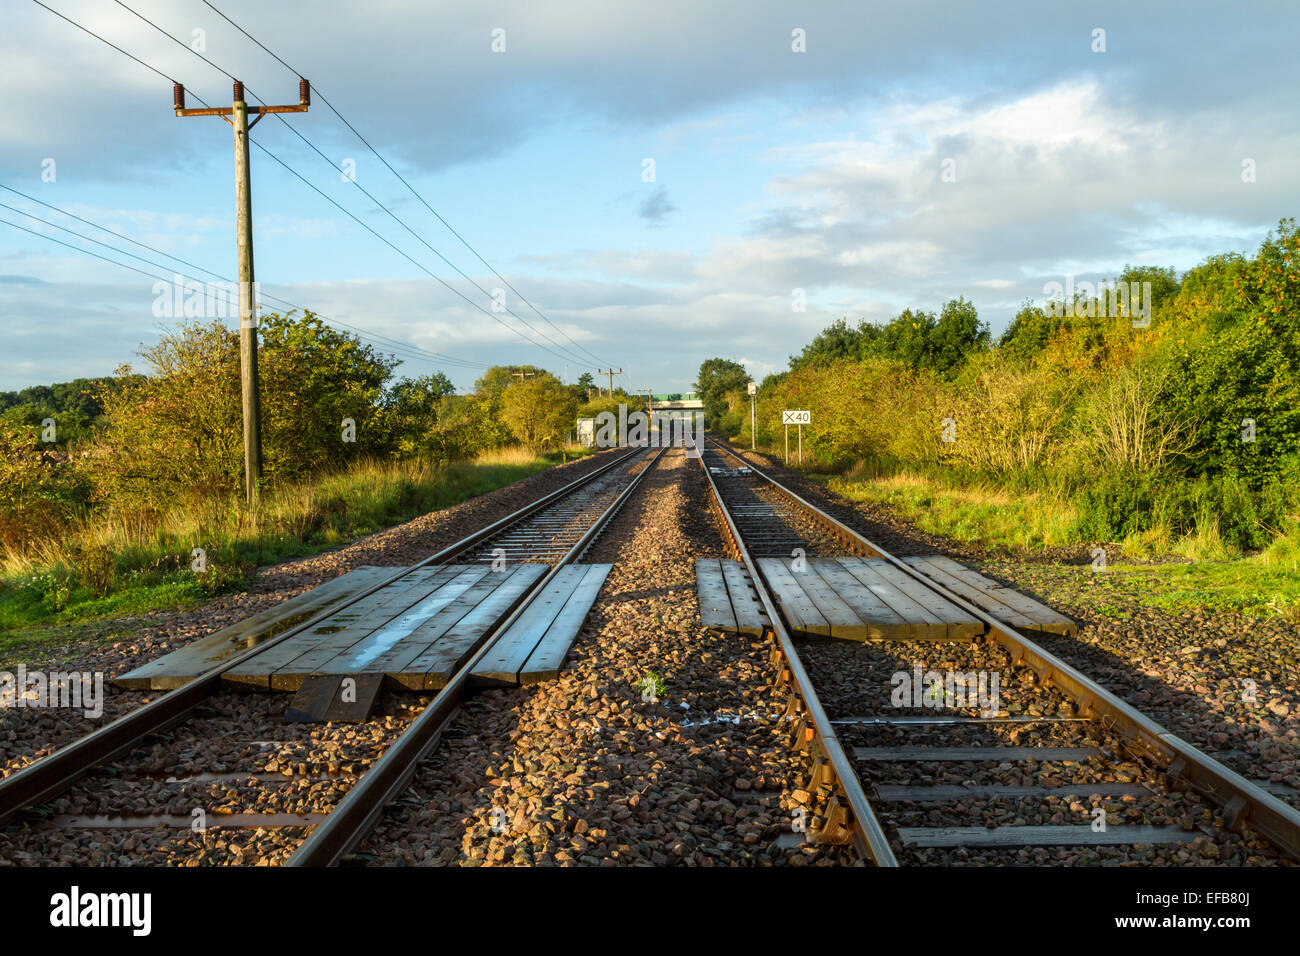 Straight railway track running into the distance with wooden planks forming an unmanned and unprotected level crossing, Nottinghamshire, England, UK Stock Photo